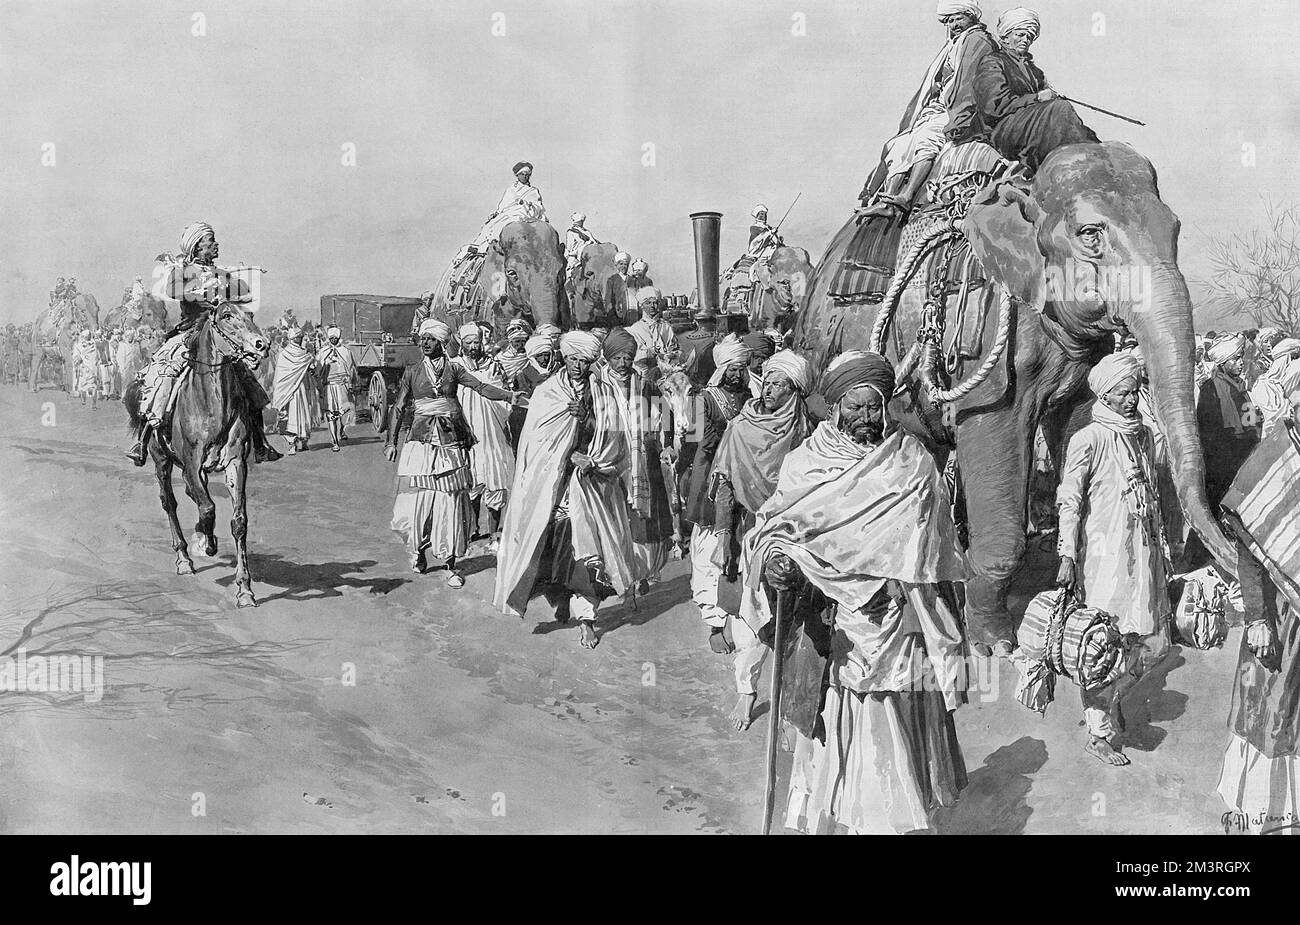 The most remarkable caravan that ever entered Afghanistan - a steam roller and motors for the Ameer.  Ten elephants sent to Chaman to convey a steam roller, a motor car, a stone-crushing machine and a motor boat to Cabul (Kabul).  All intended to improve road systems in Afghanistan and for the Amir to be able to travel to the outer reaches of his dominions in days rather than weeks.     Date: 1909 Stock Photo